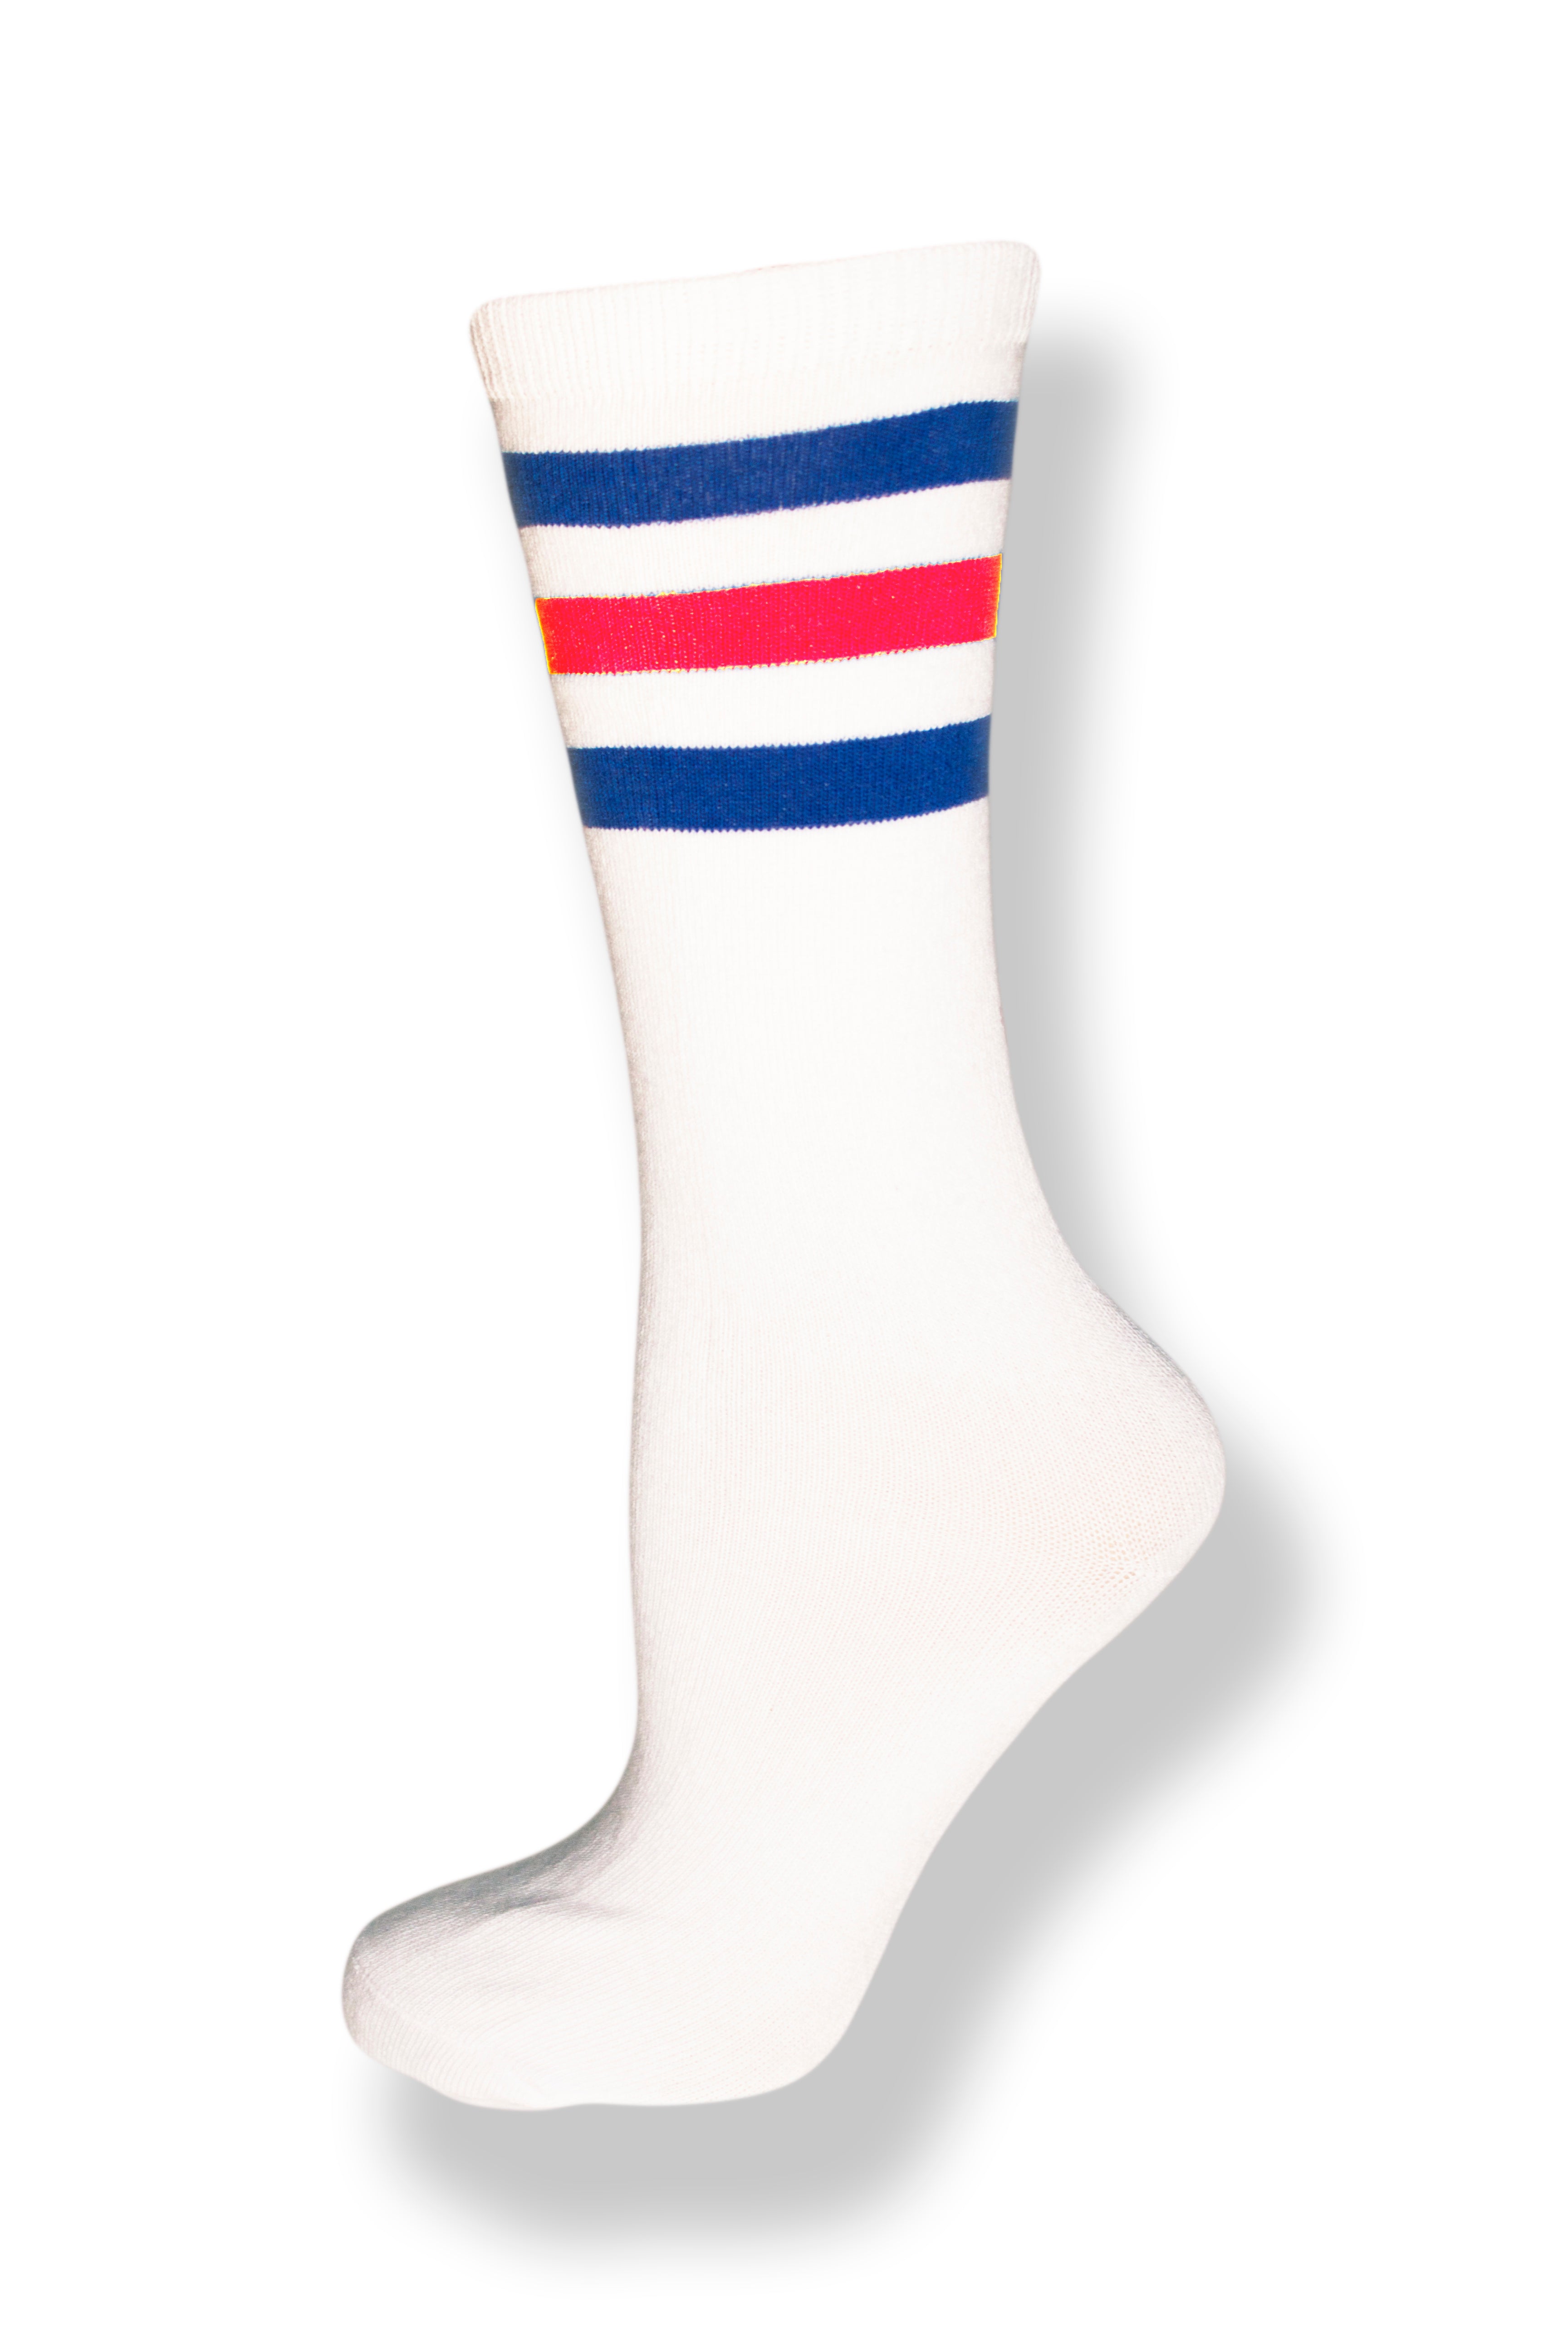 6 Pack Crew Cut Calf Height White Sock with Colored Stripes